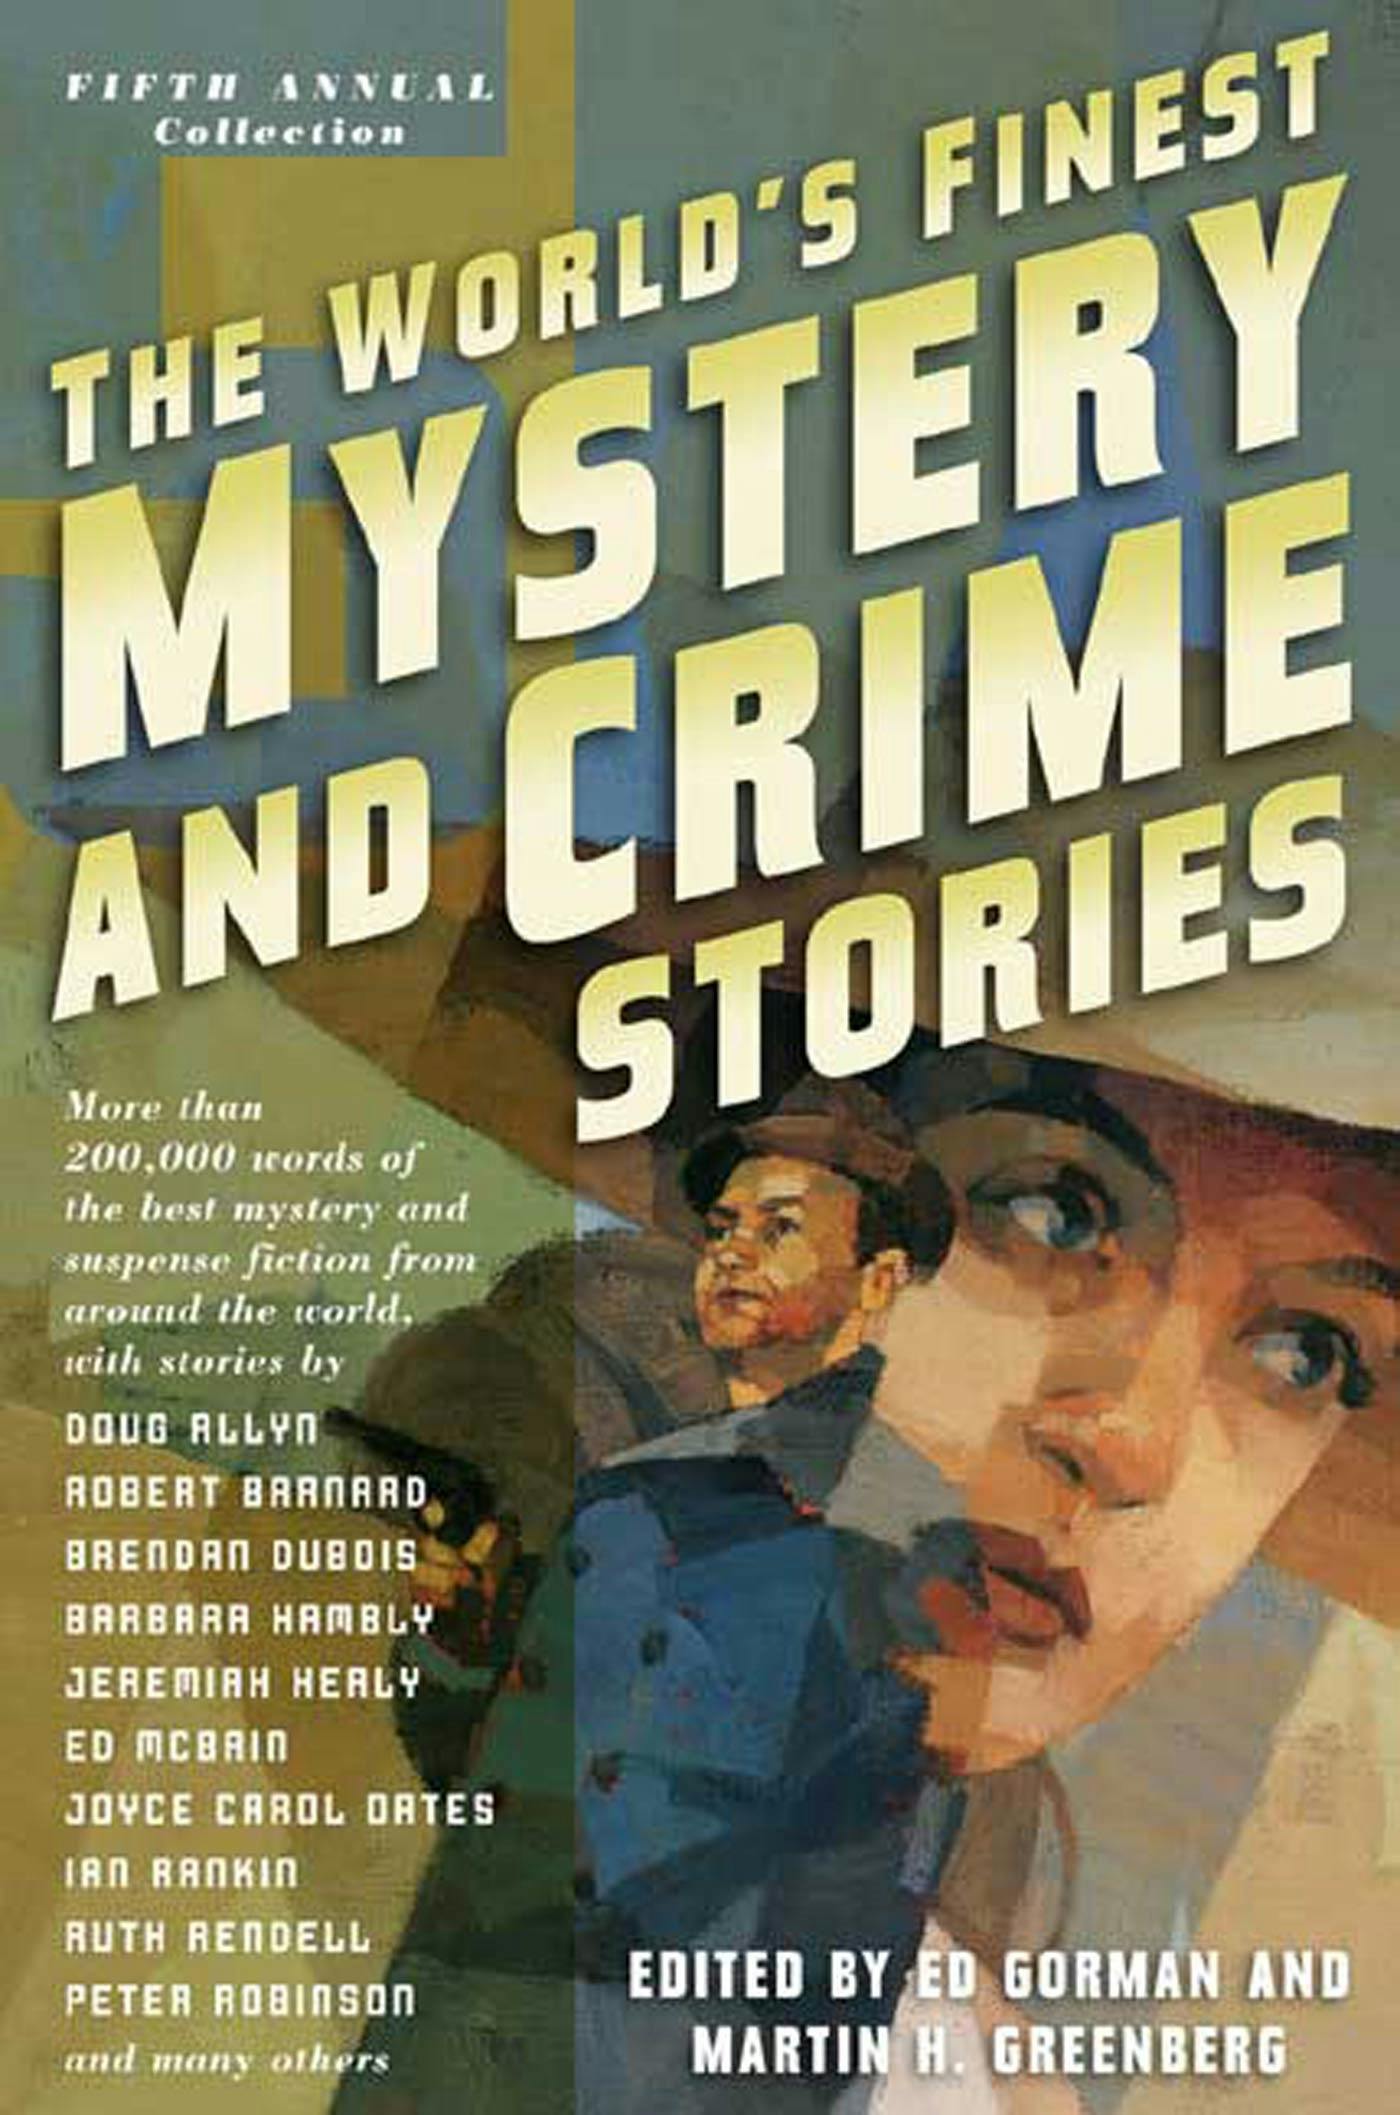 Cover for the book titled as: The World's Finest Mystery and Crime Stories: 5